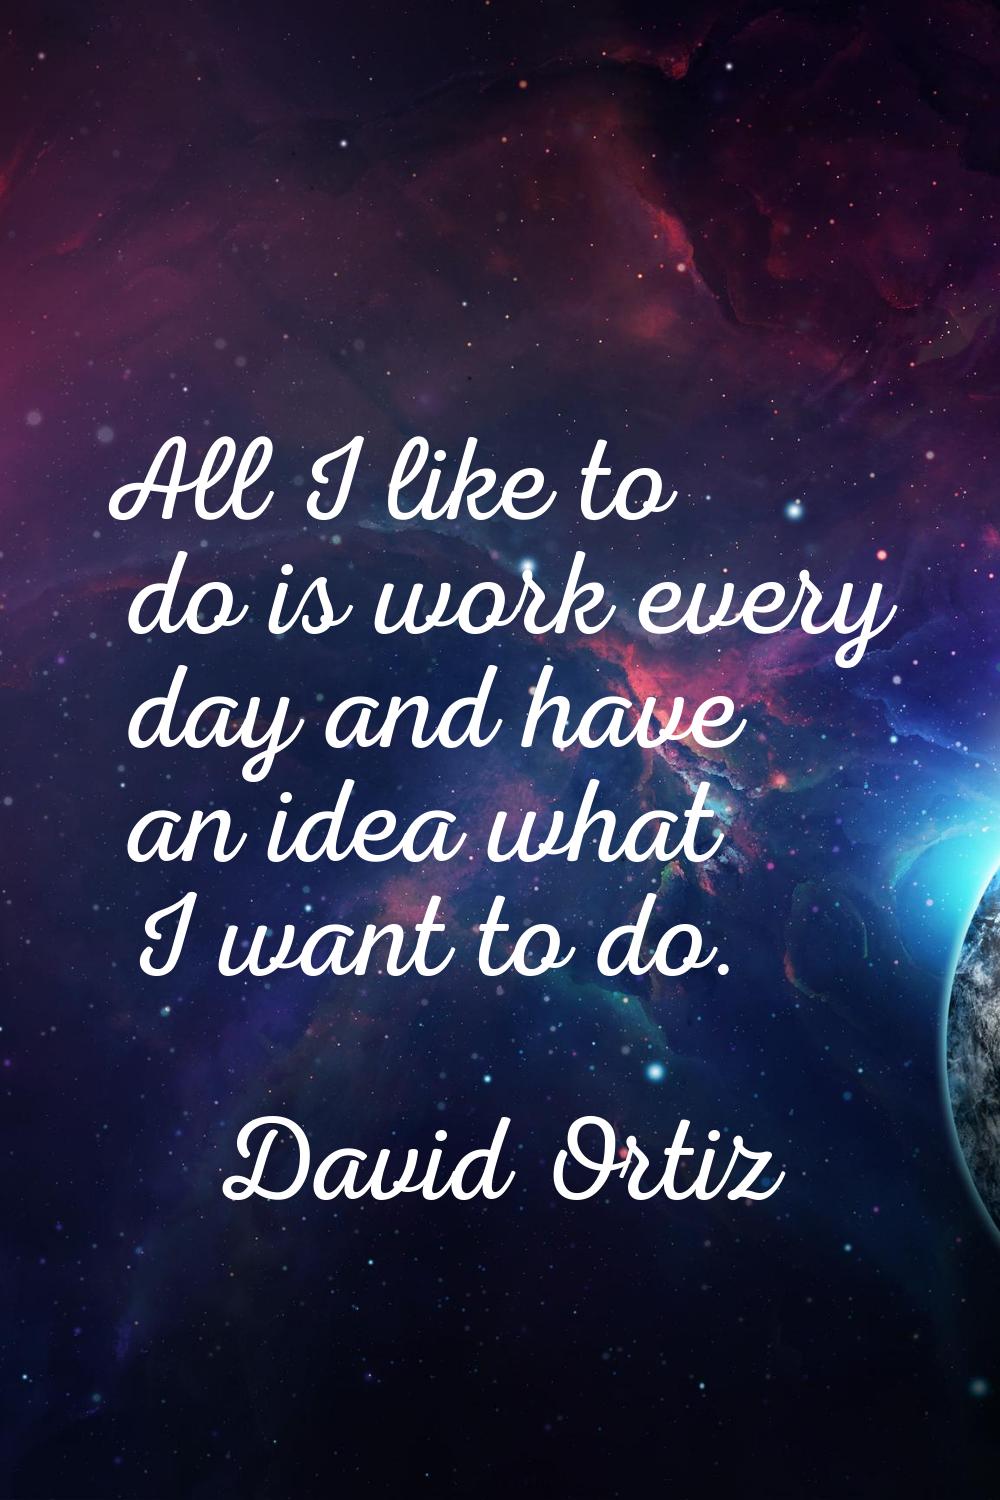 All I like to do is work every day and have an idea what I want to do.